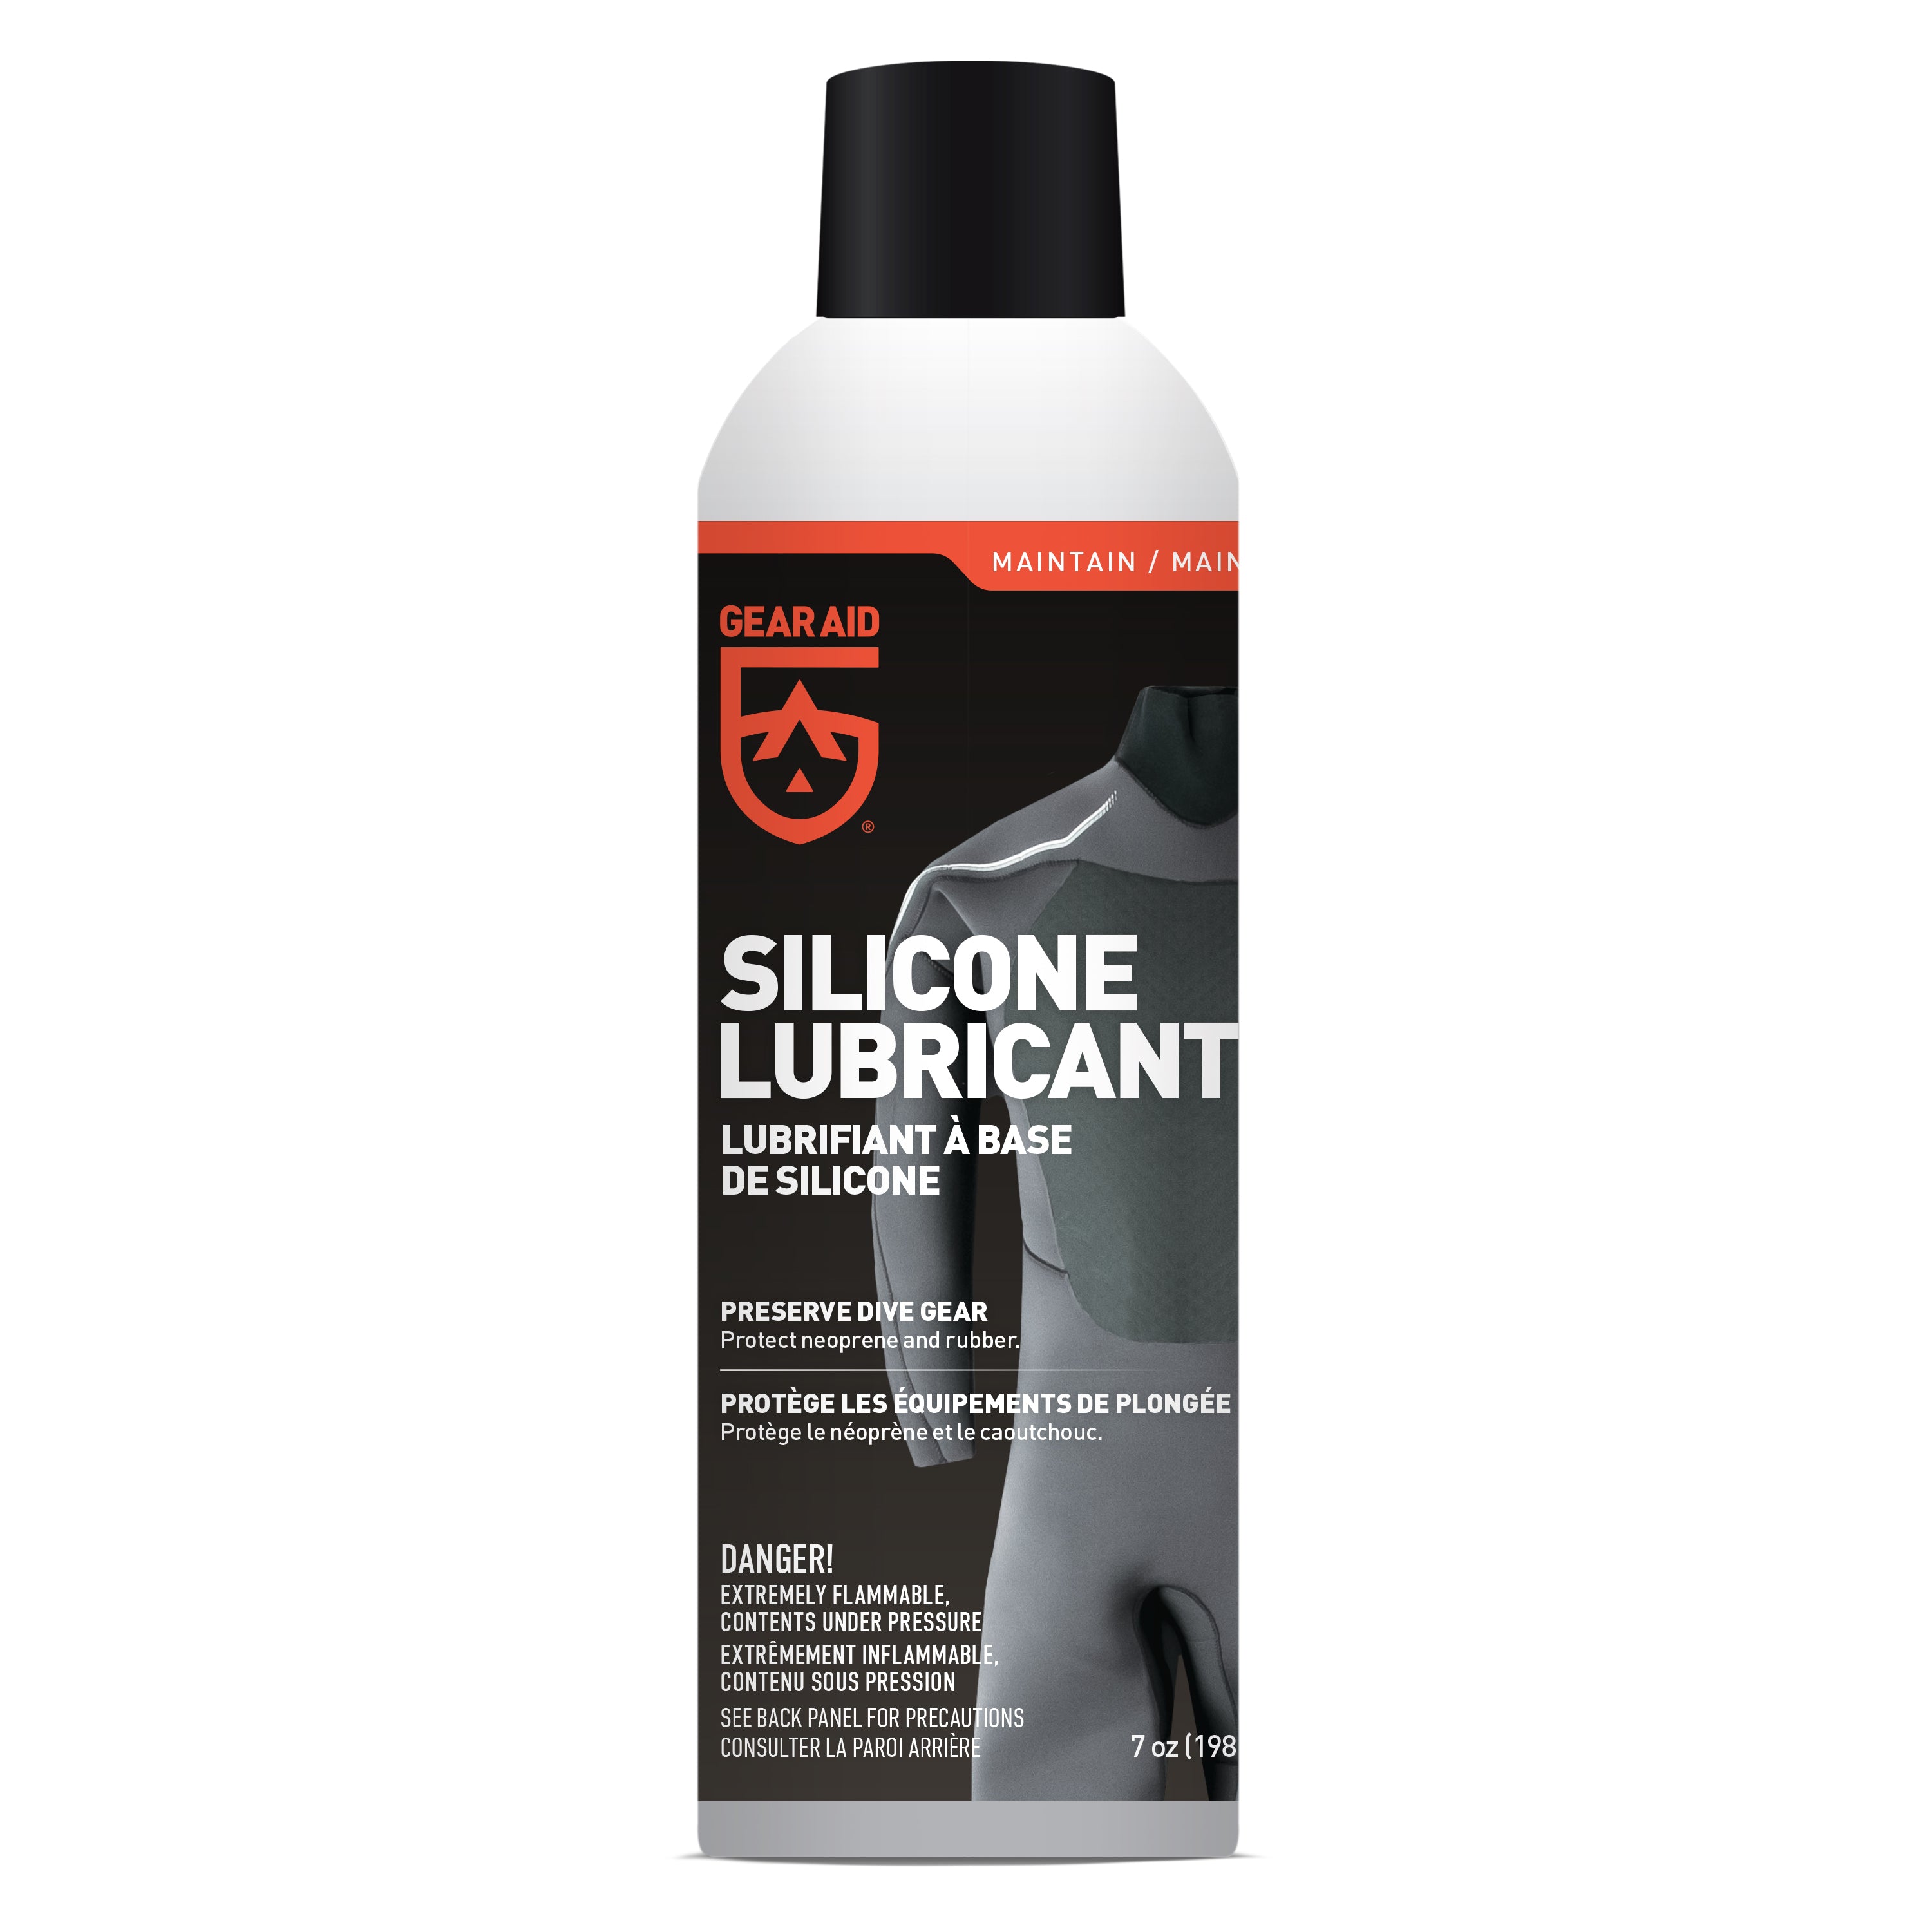 Seavenger Silicone Spray and Lubricant